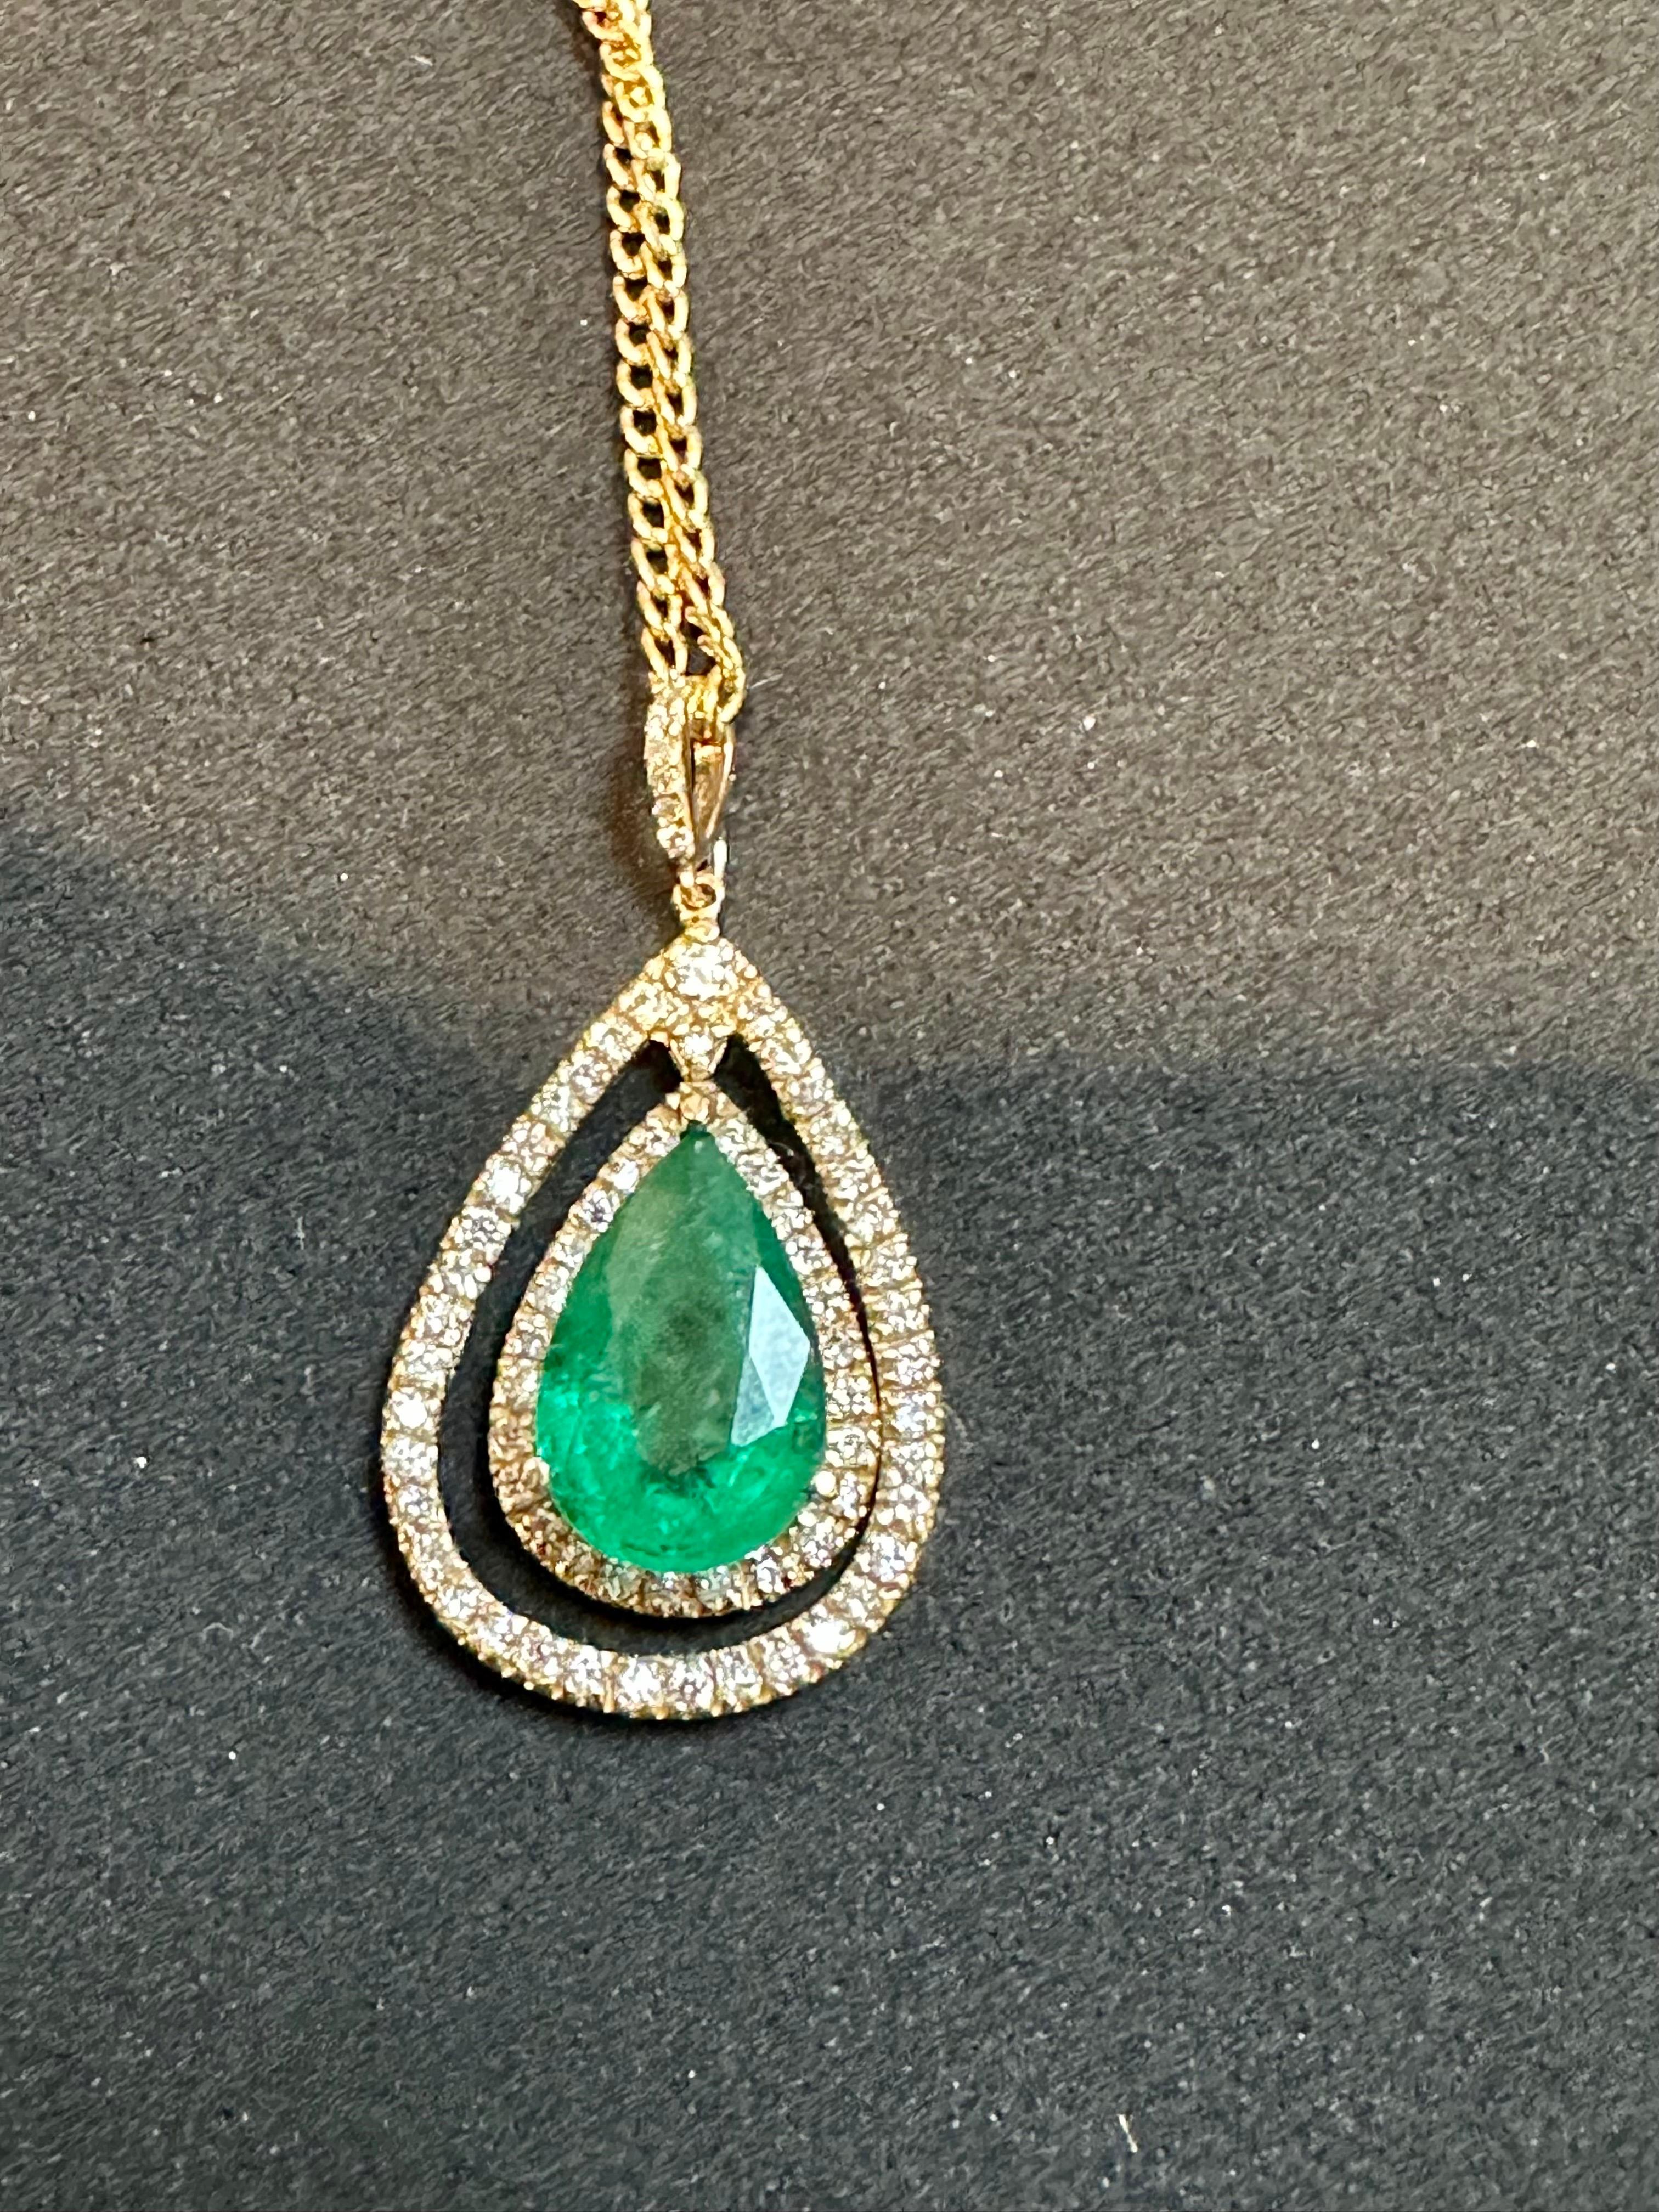 Approximately 5 Ct Natural Emerald Zambia & Diamond Pendant 14 Karat Yellow Gold Chain
 Emerald is about 5 carat 
There are approximately 1.2 ct of diamonds
The center pear shape stone is surrounded by two rows of diamonds.
Very desirable color and